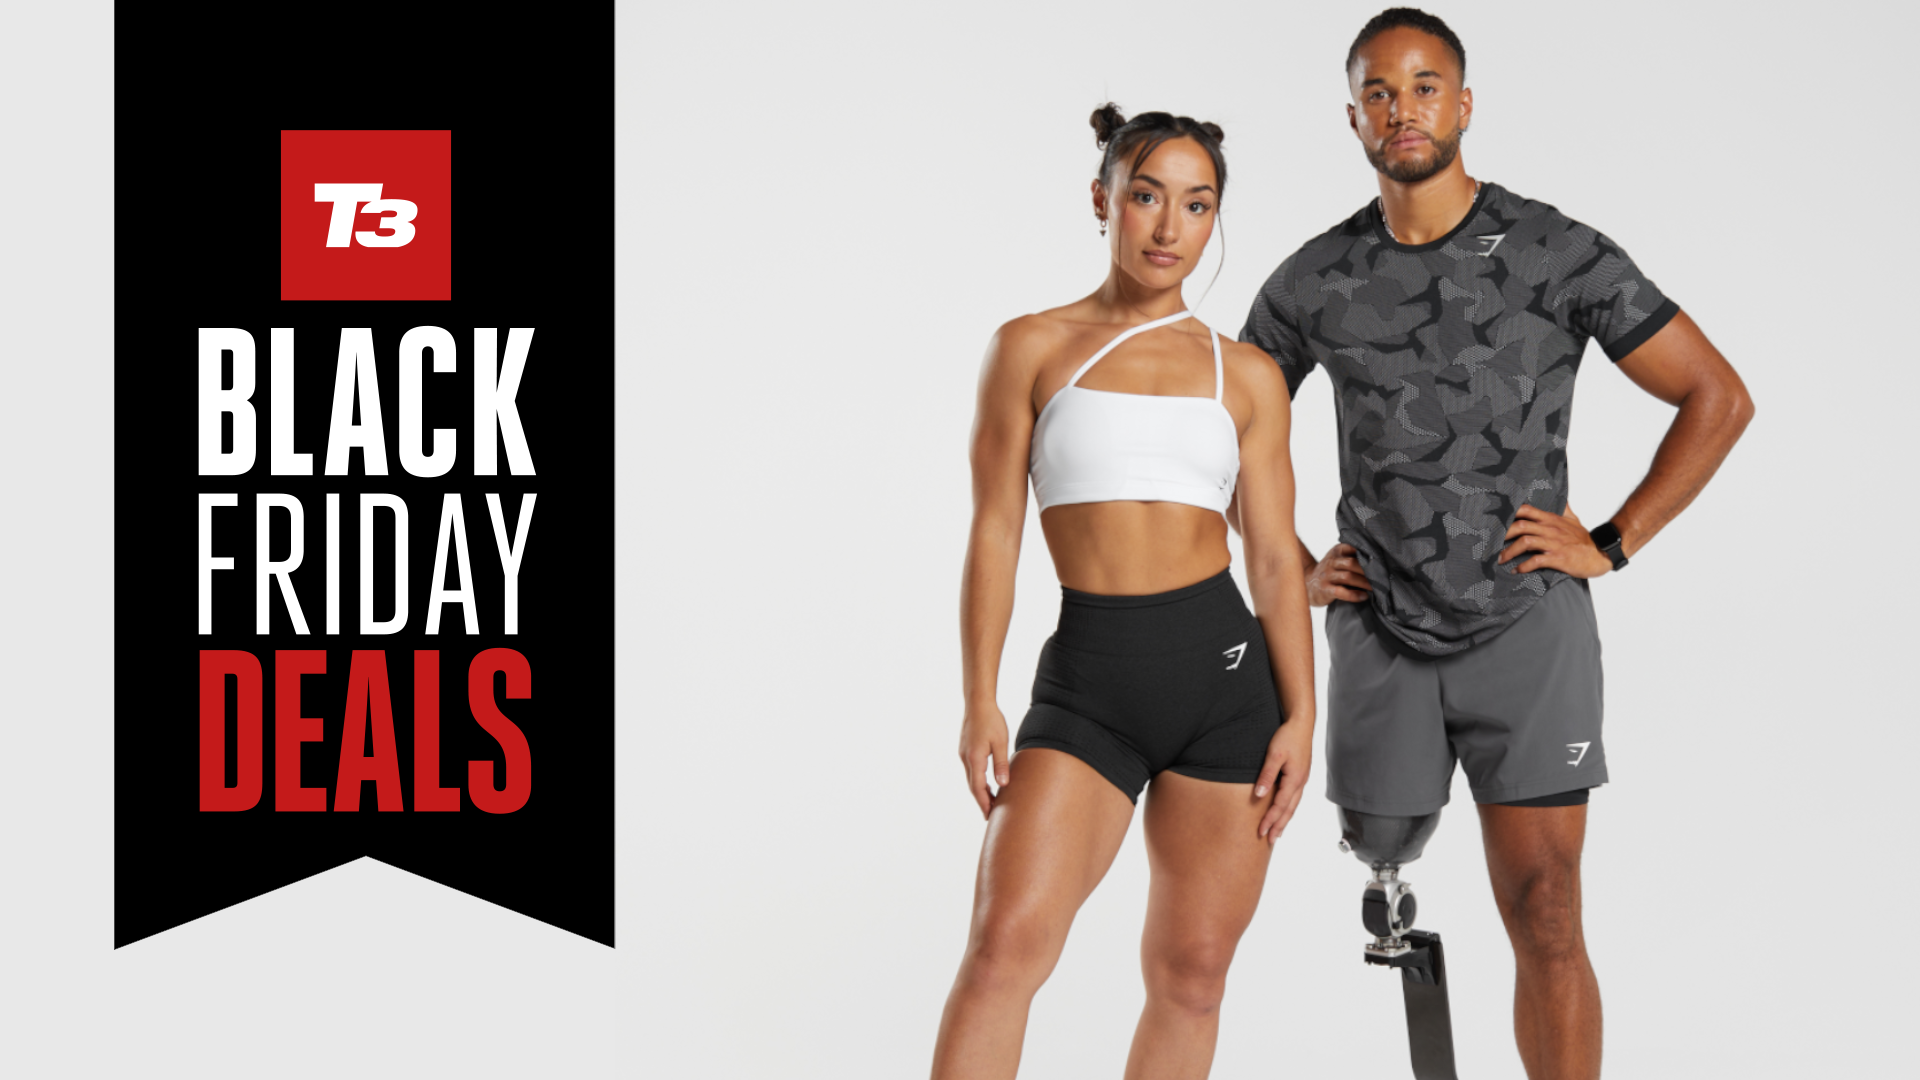 The Gymshark Black Friday sale is live and you can save up to 70